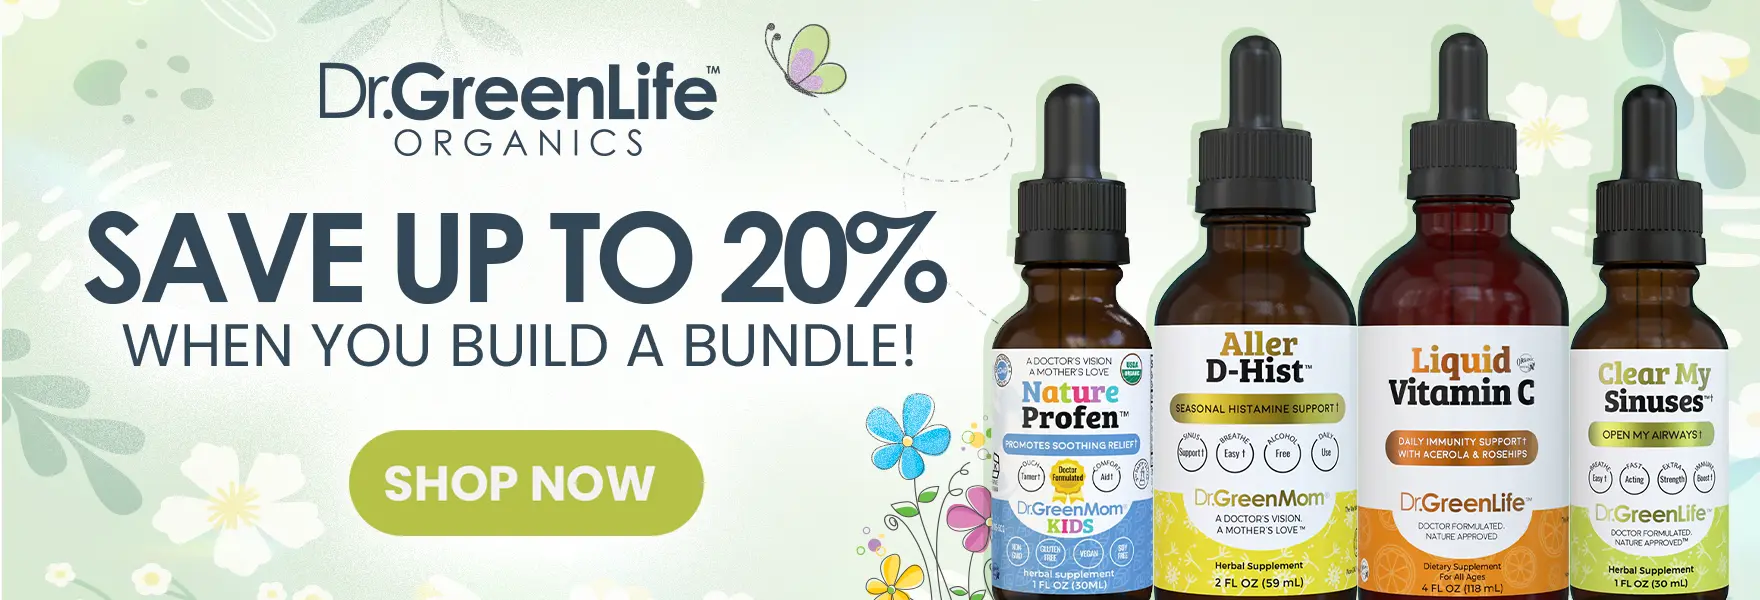 Dr Green Life Organics™ - Save up to 20% when you build a bundle